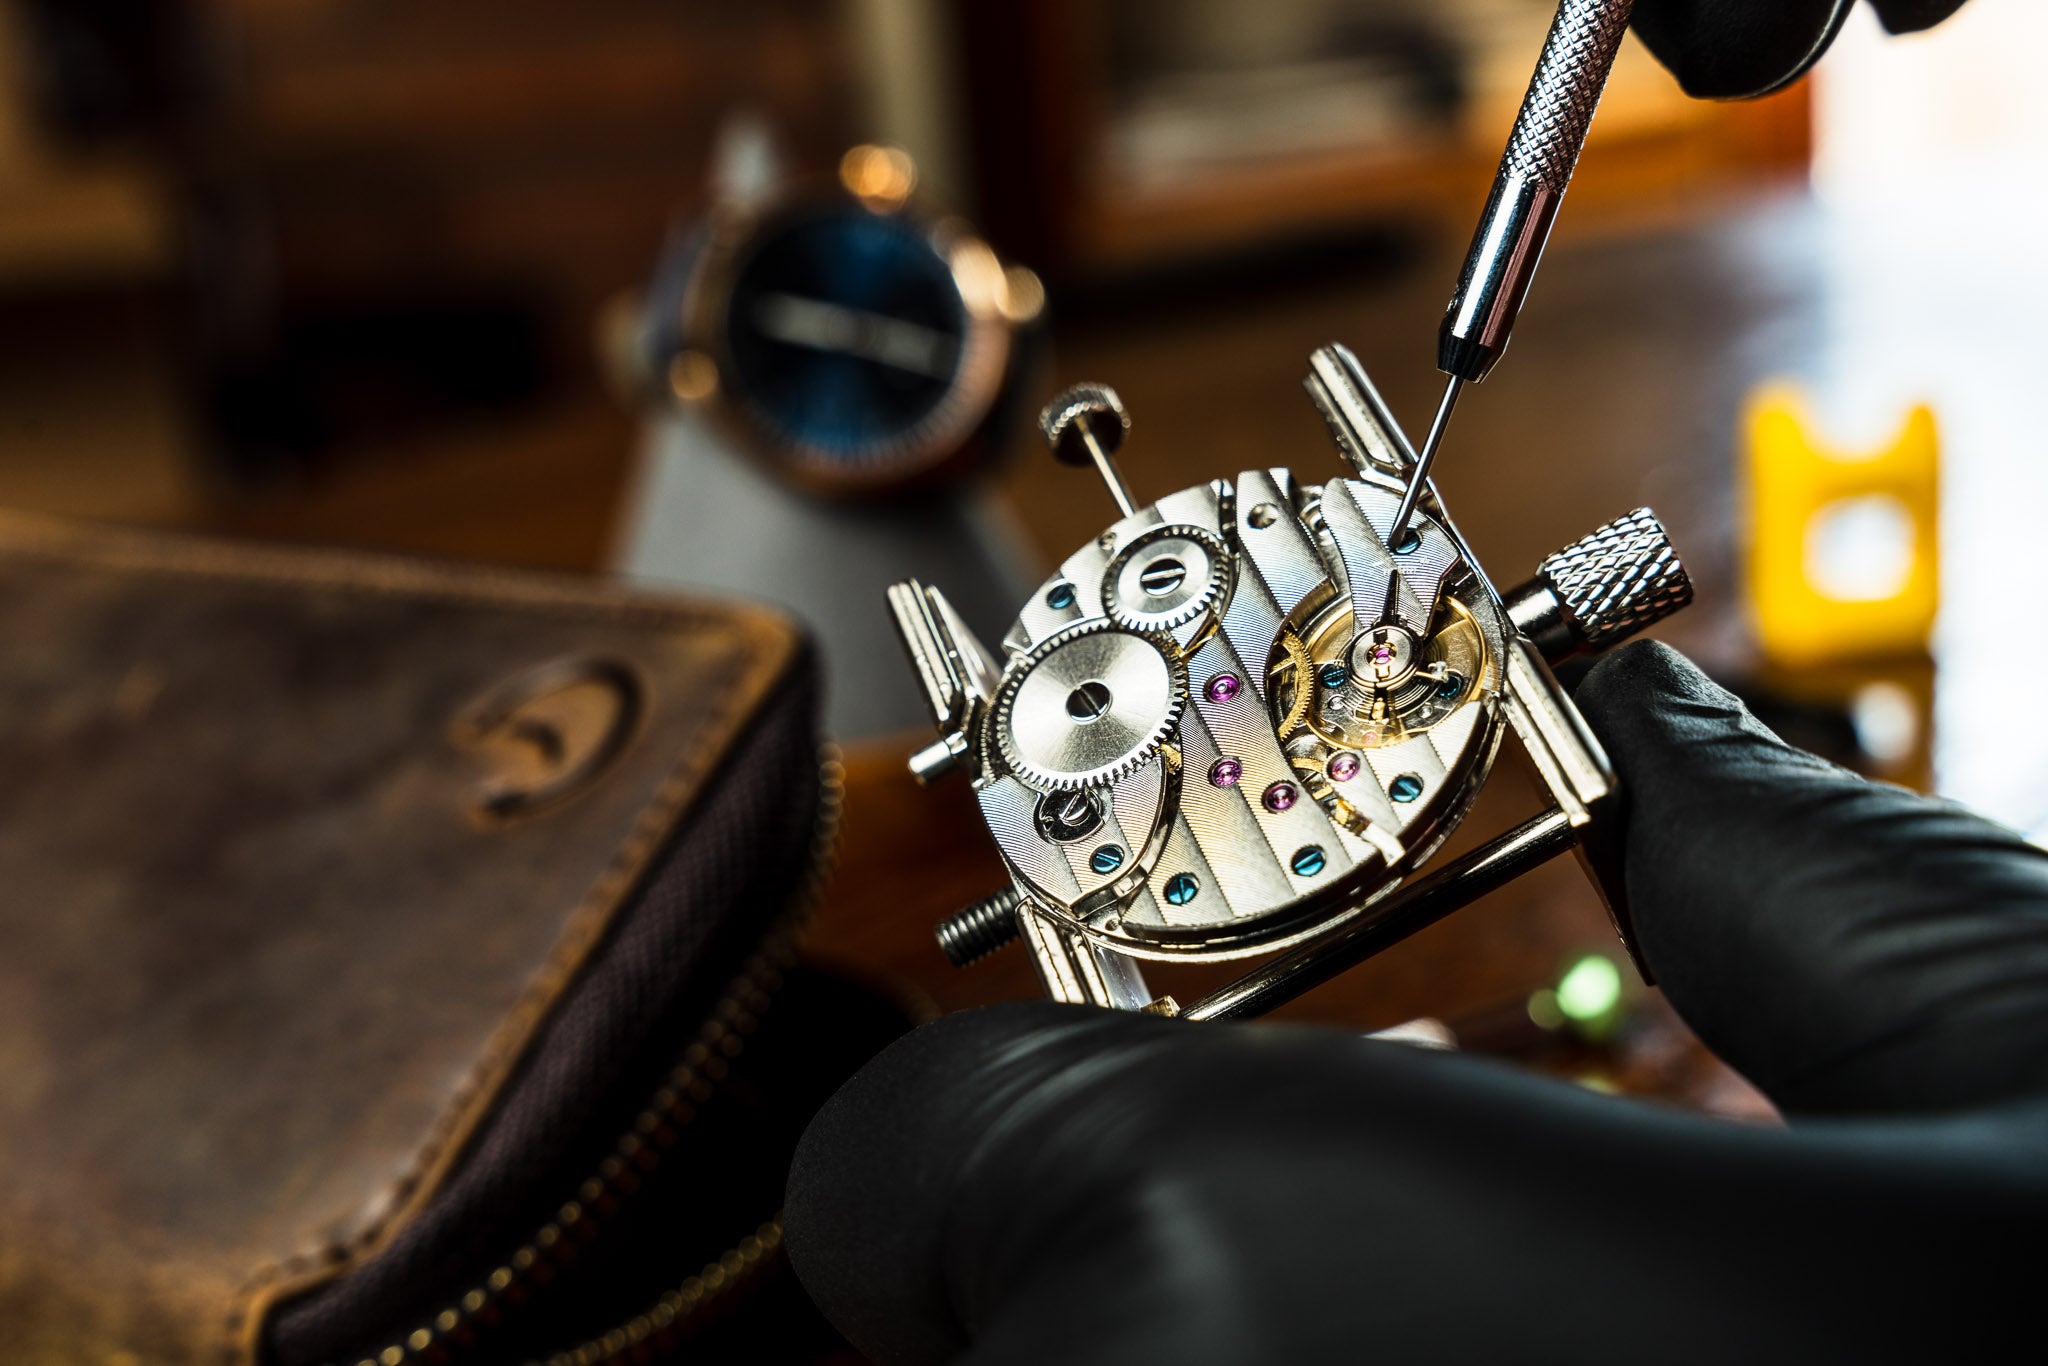 How To Build A Mechanical Watch - Rotate Watch Kits Tutorial - YouTube